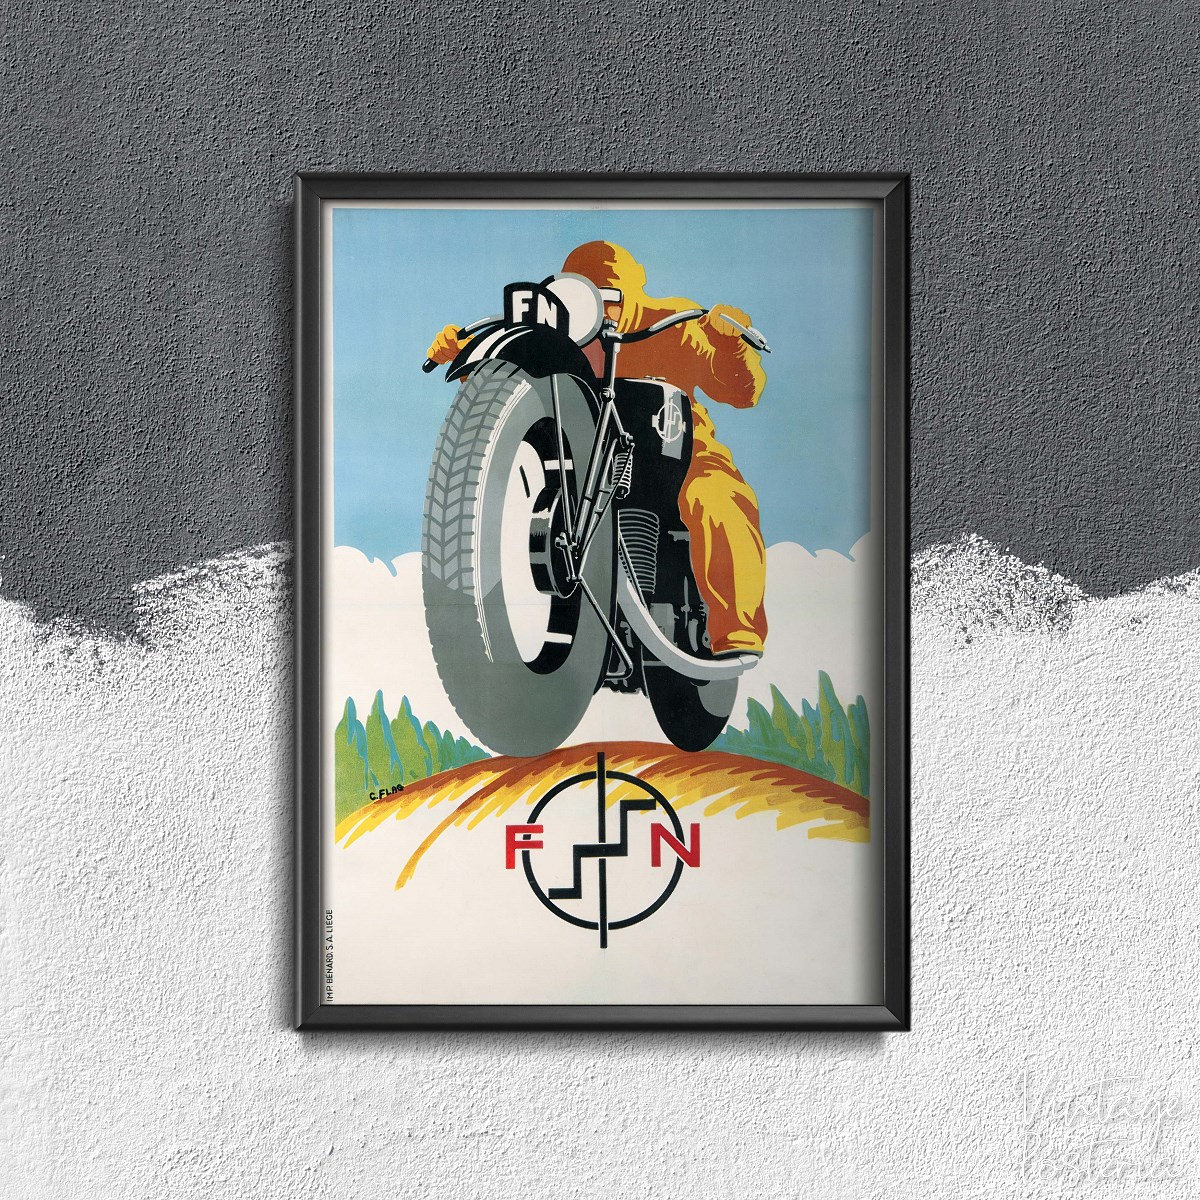 Cycling Decor #951 Cycling Wall Decor FN Motorcycle Vintage Cycle Poster Vintage Poster Vintage Wall Decoration